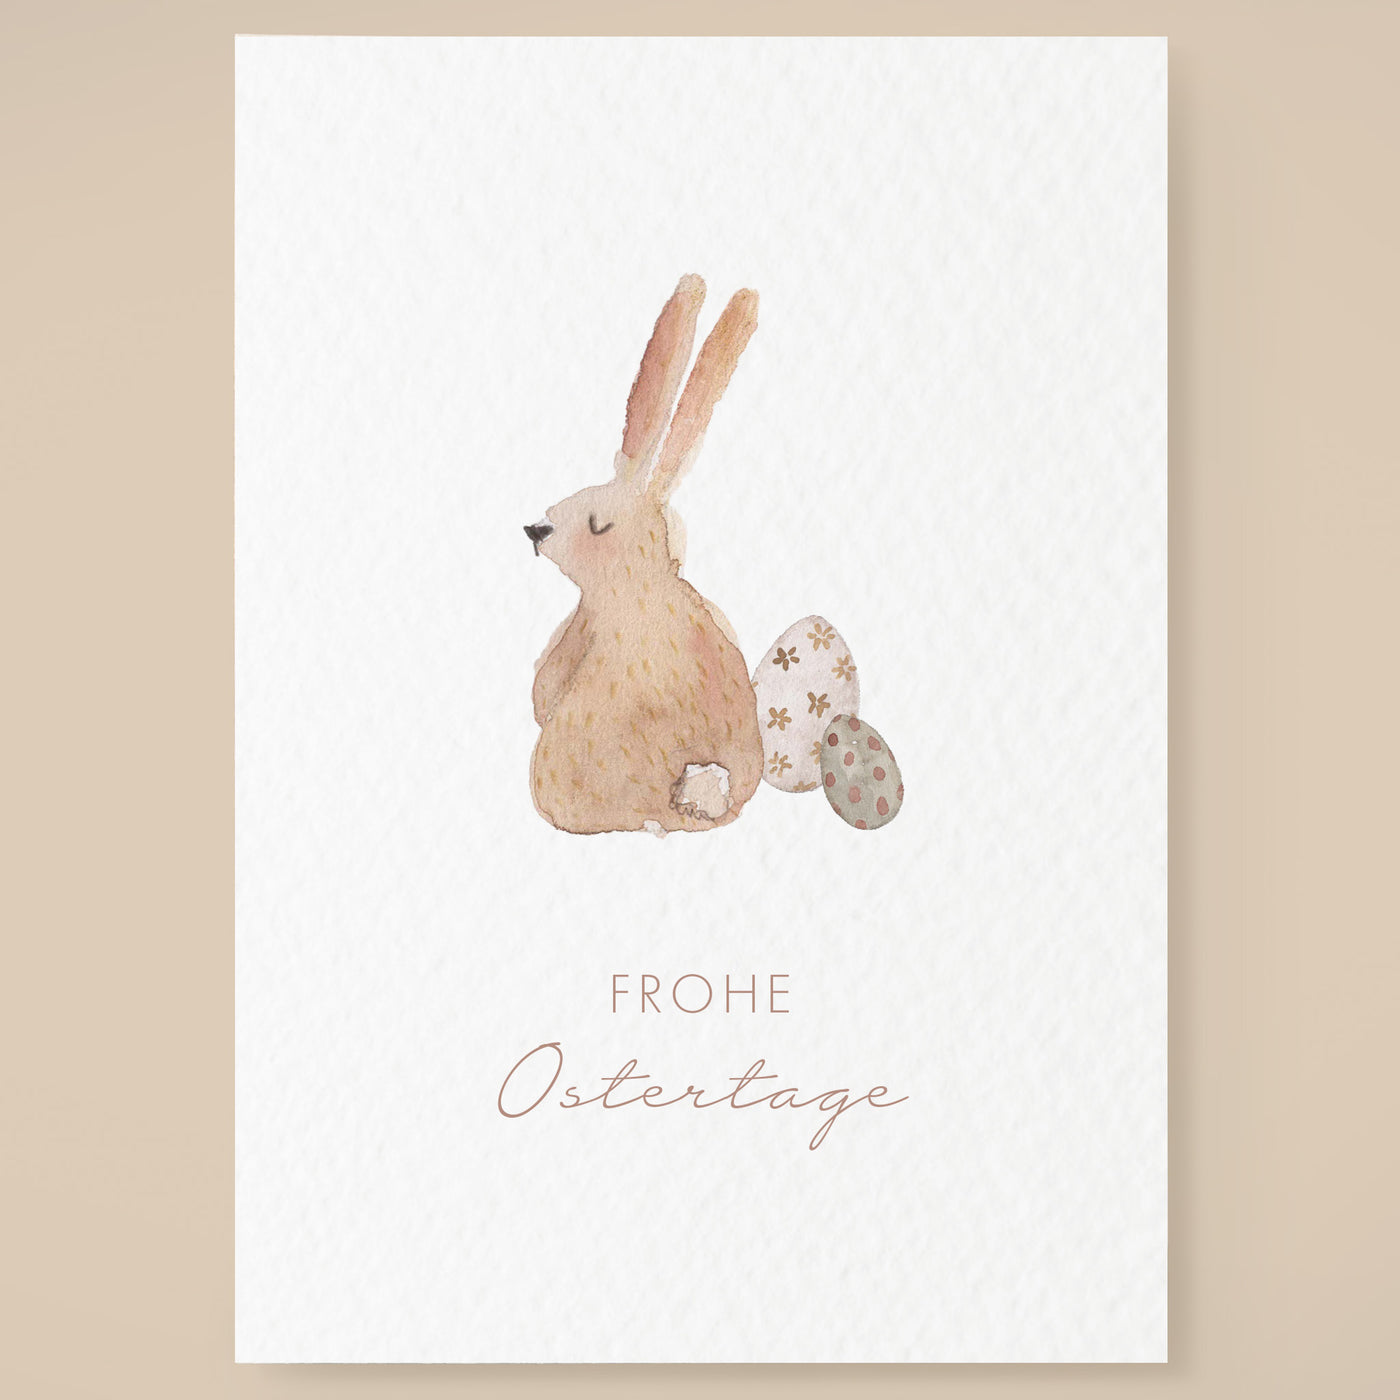 Postkarte Hase "Frohe Ostertage"